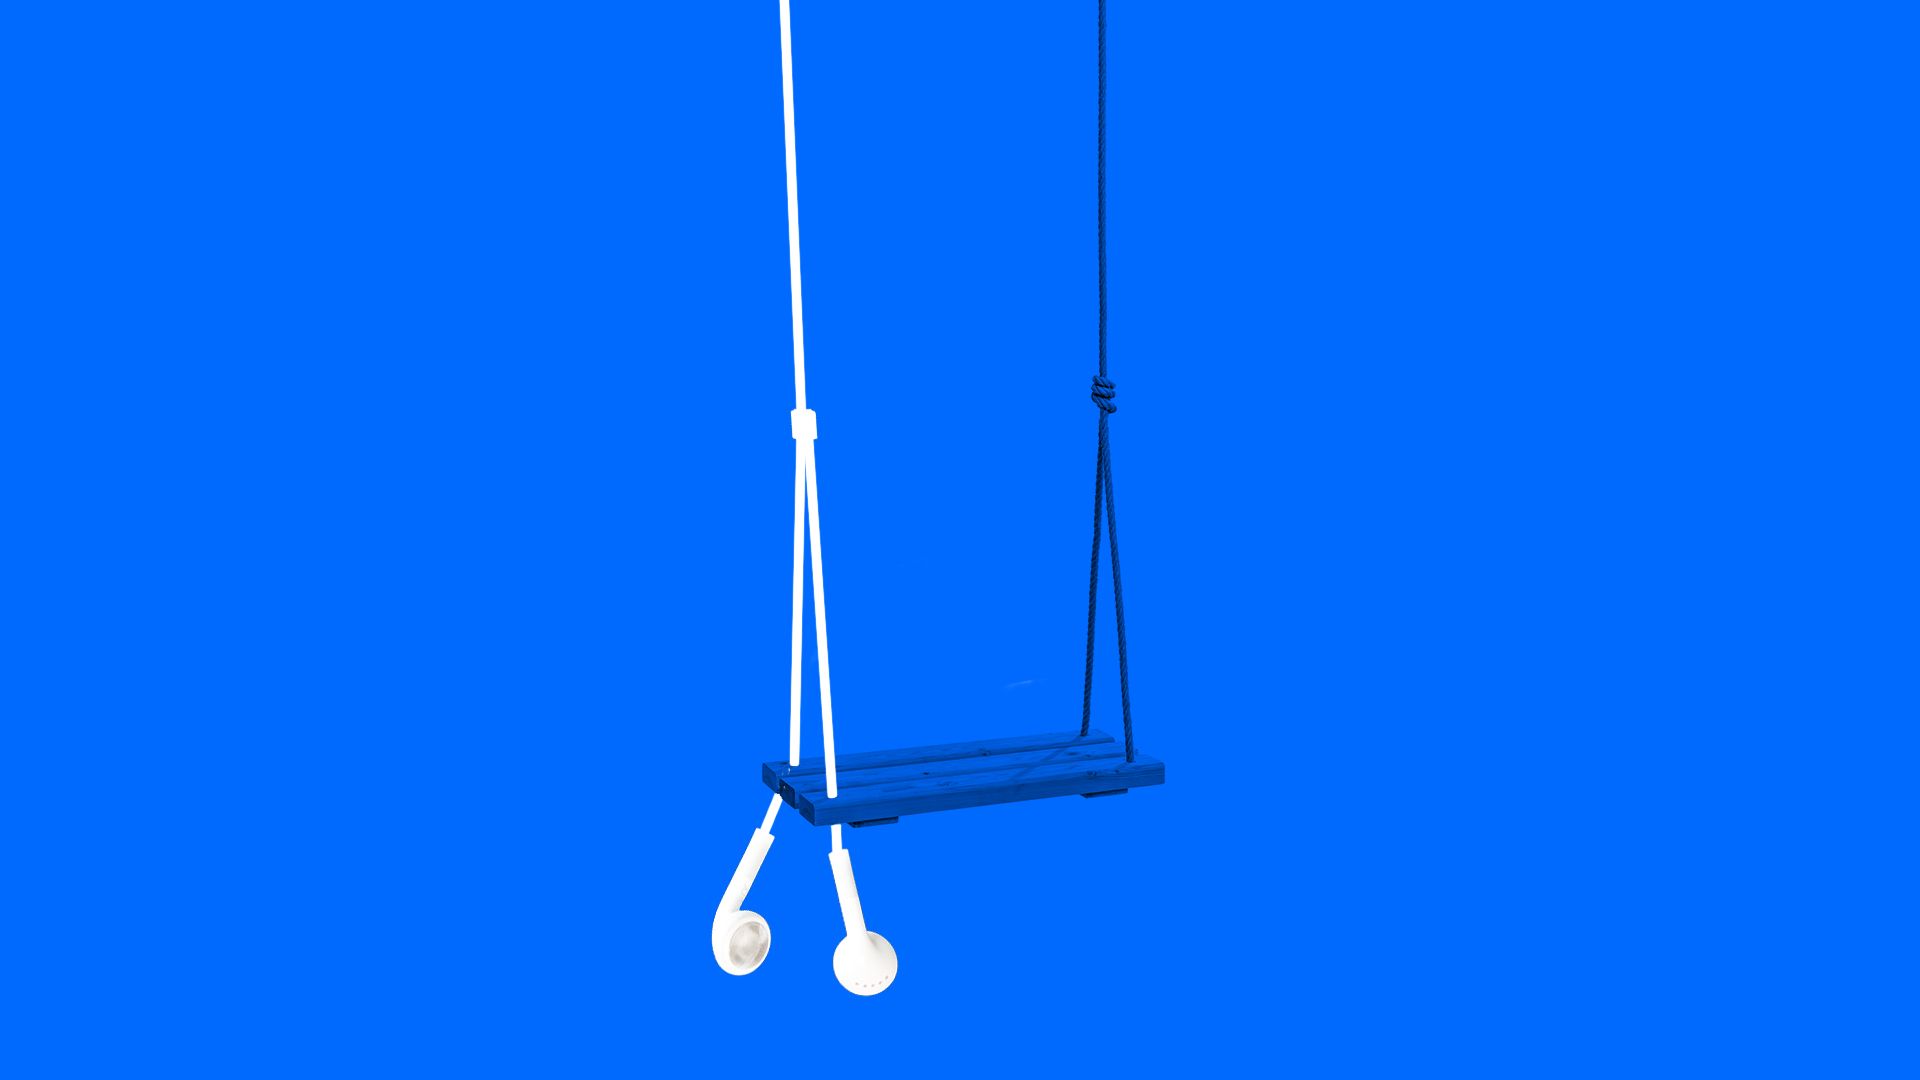 Illustration of a child's swing dangling from Apple earbuds